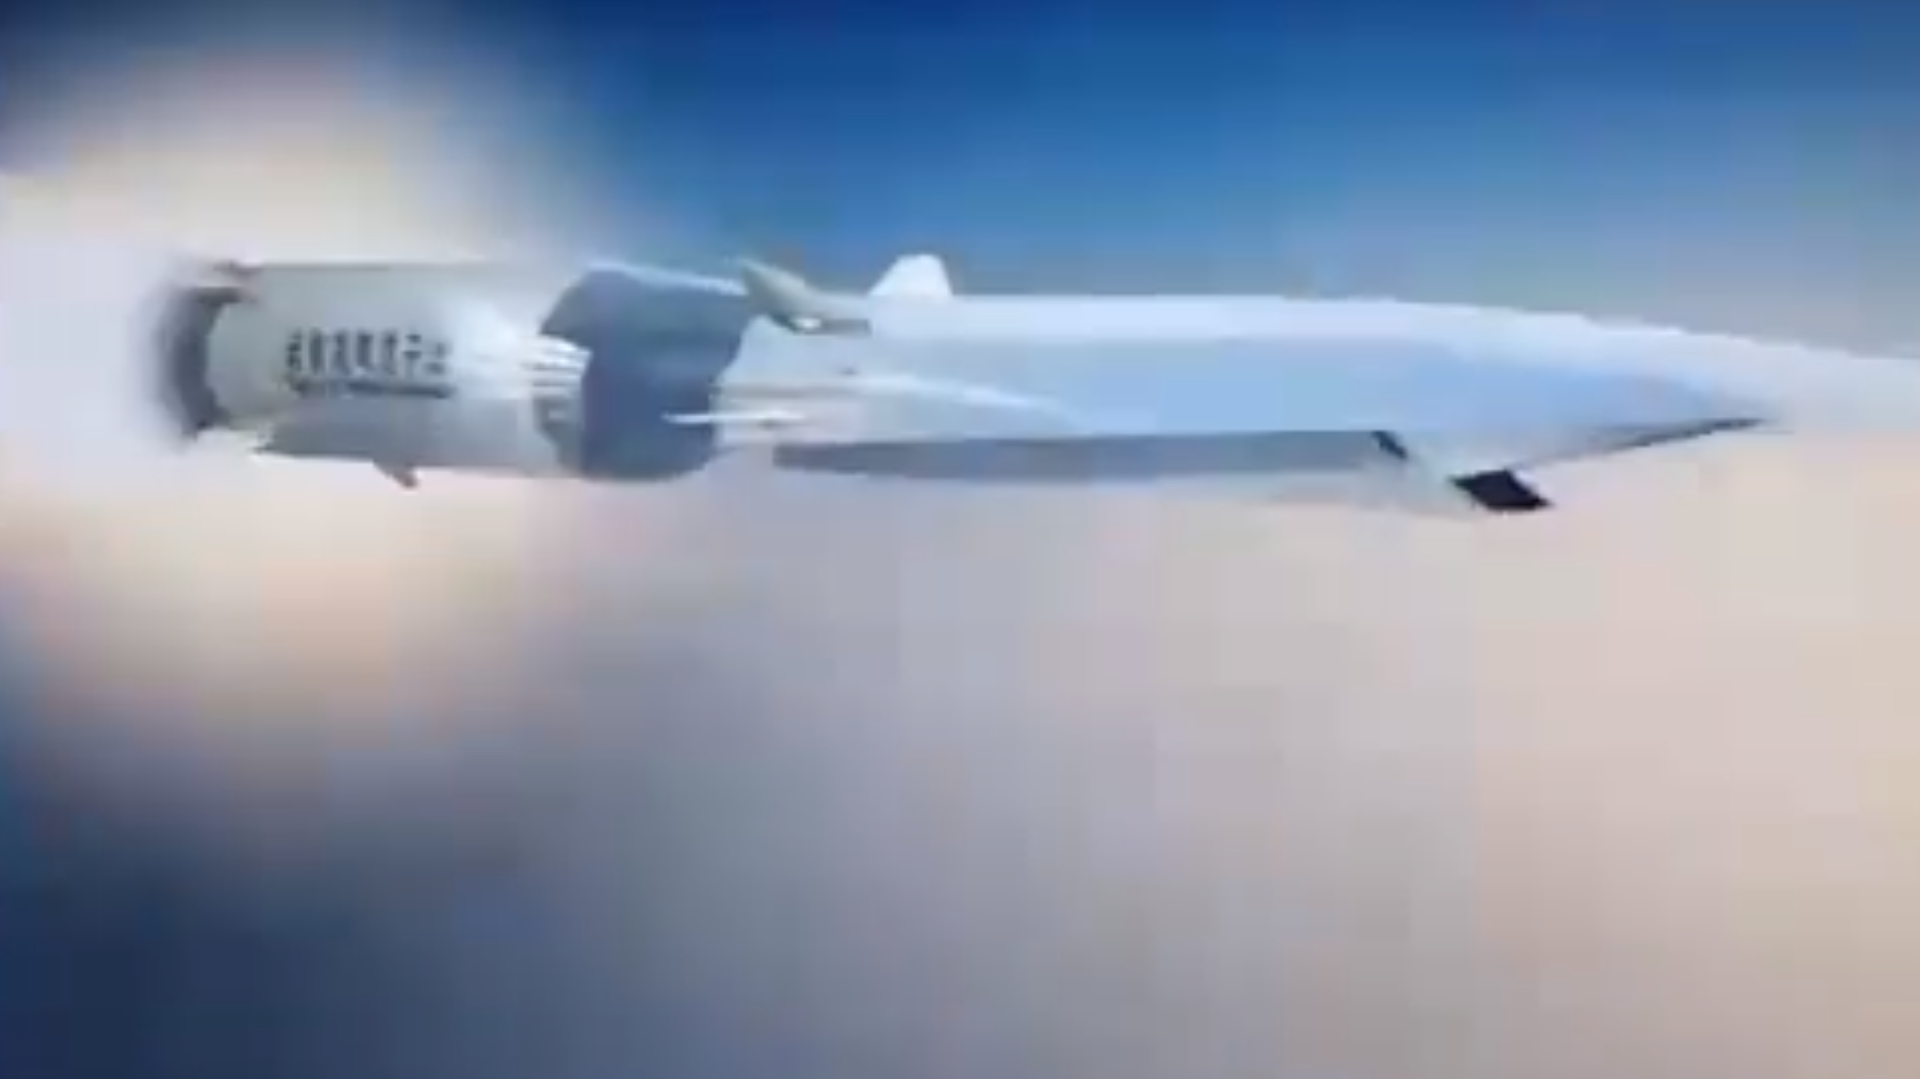 Still from a video of South Korea's prototype hypersonic missile, Hycore, developed by the Defense Ministry’s Agency for Defense Development (ADD). - Sputnik International, 1920, 08.12.2021